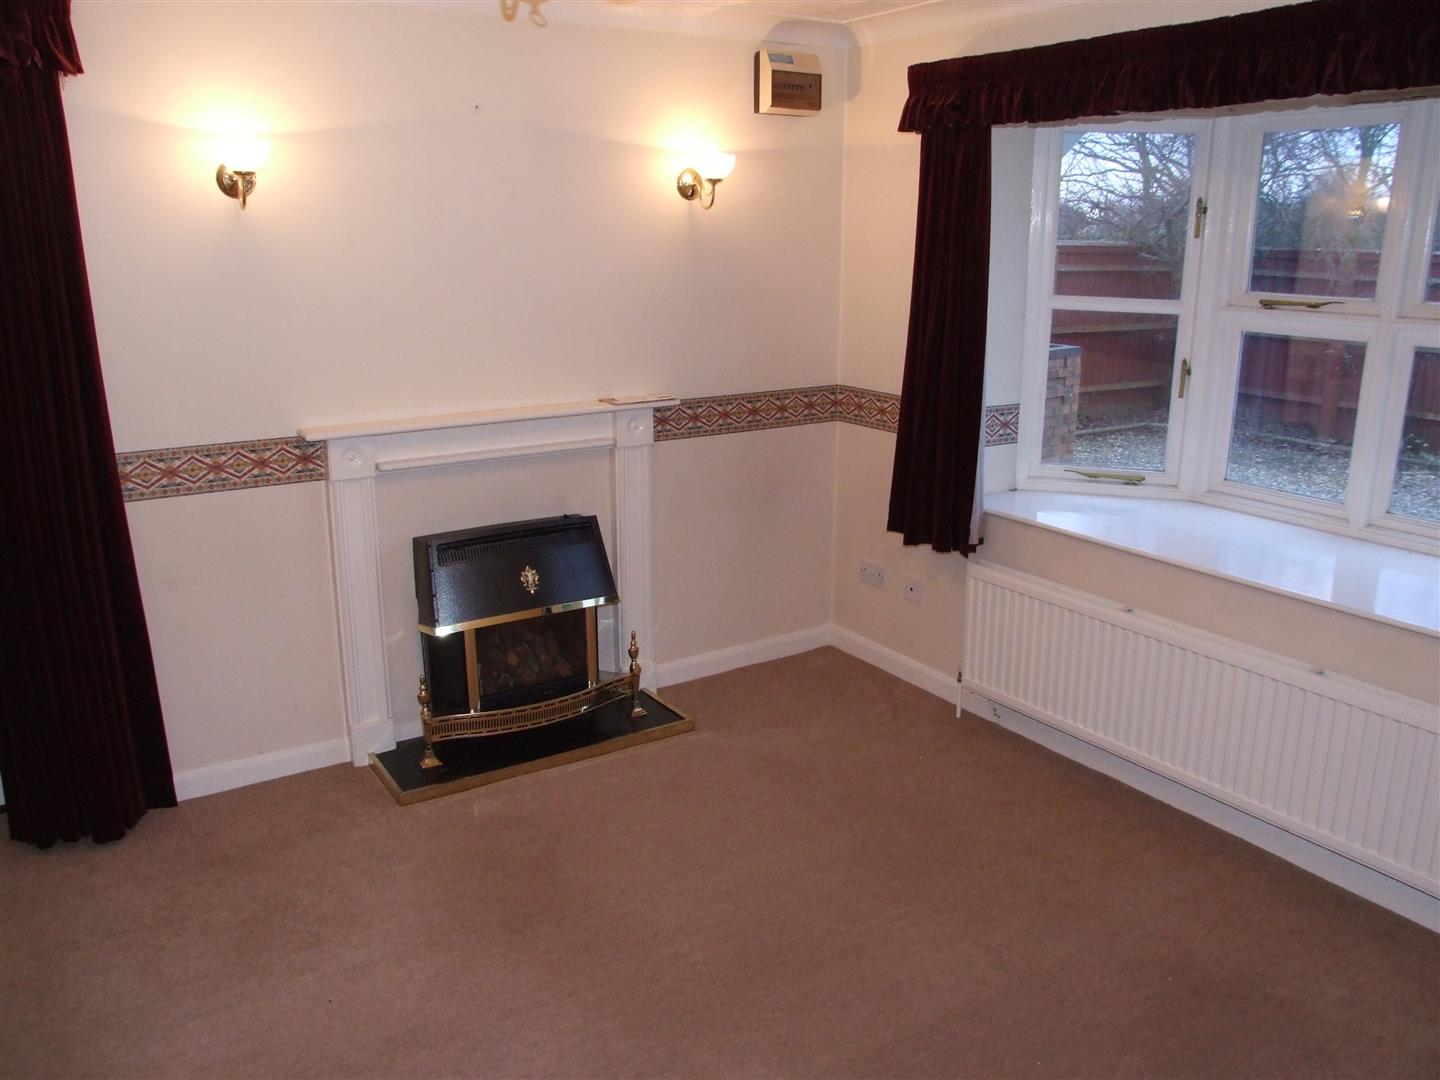 1 bed maisonette to rent - Property Image 1